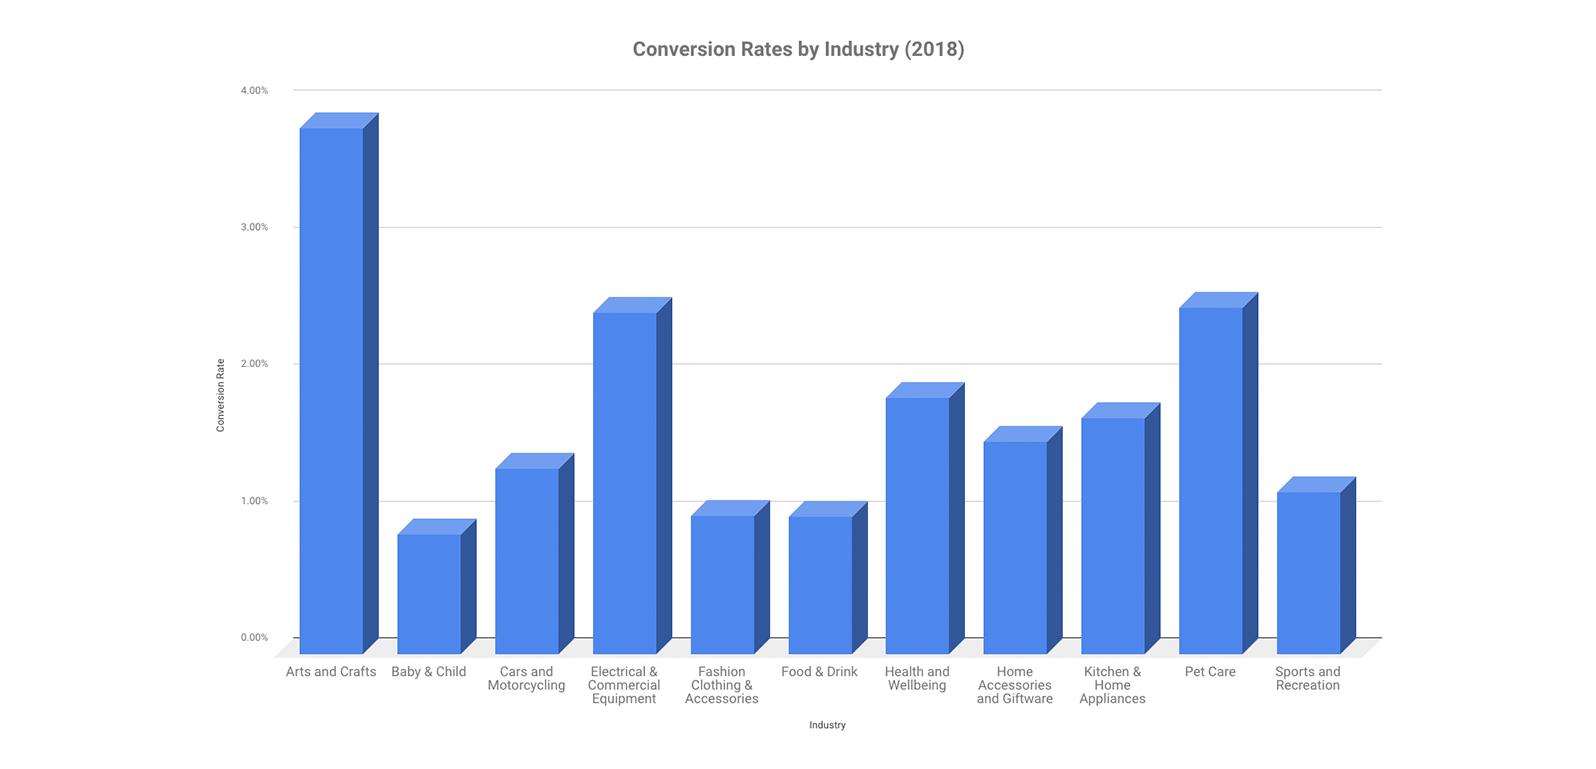 eCommerce conversion rates by industry in 2018